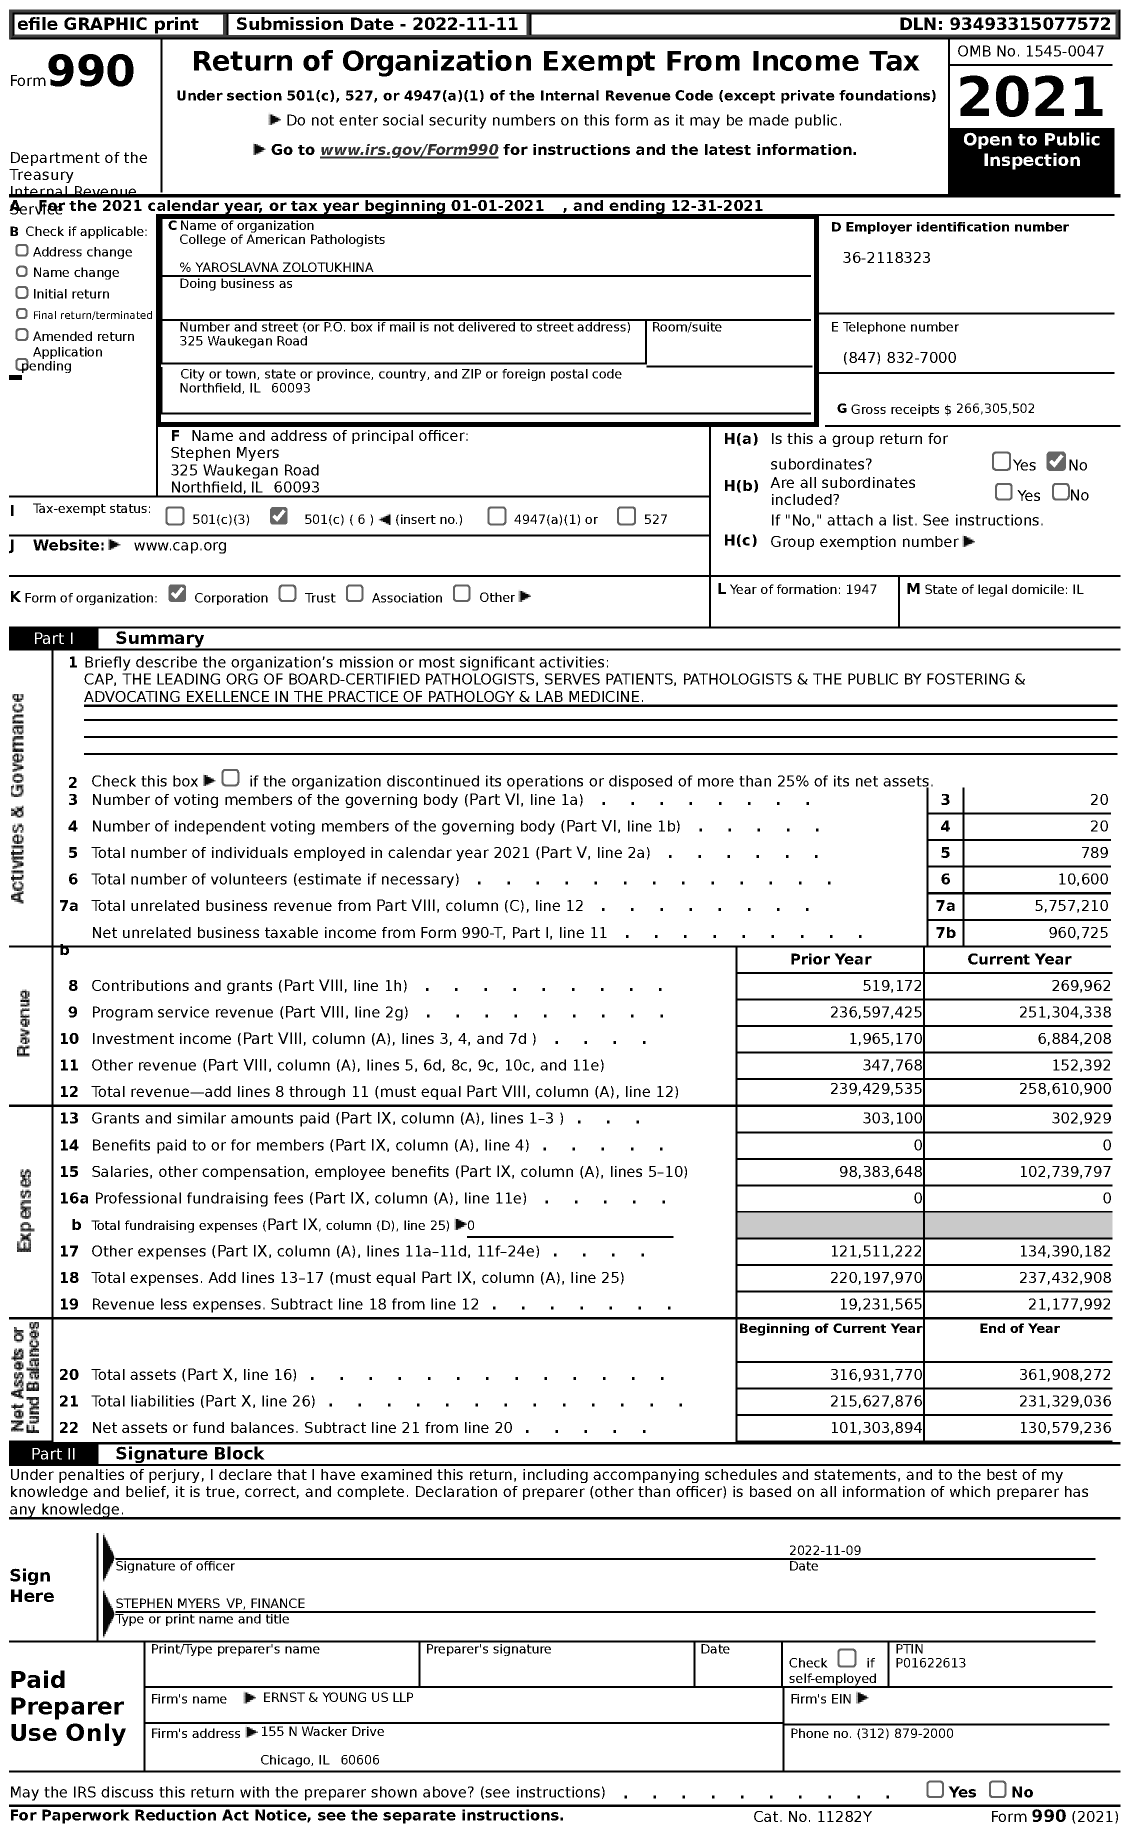 Image of first page of 2021 Form 990 for College of American Pathologists (CAP)